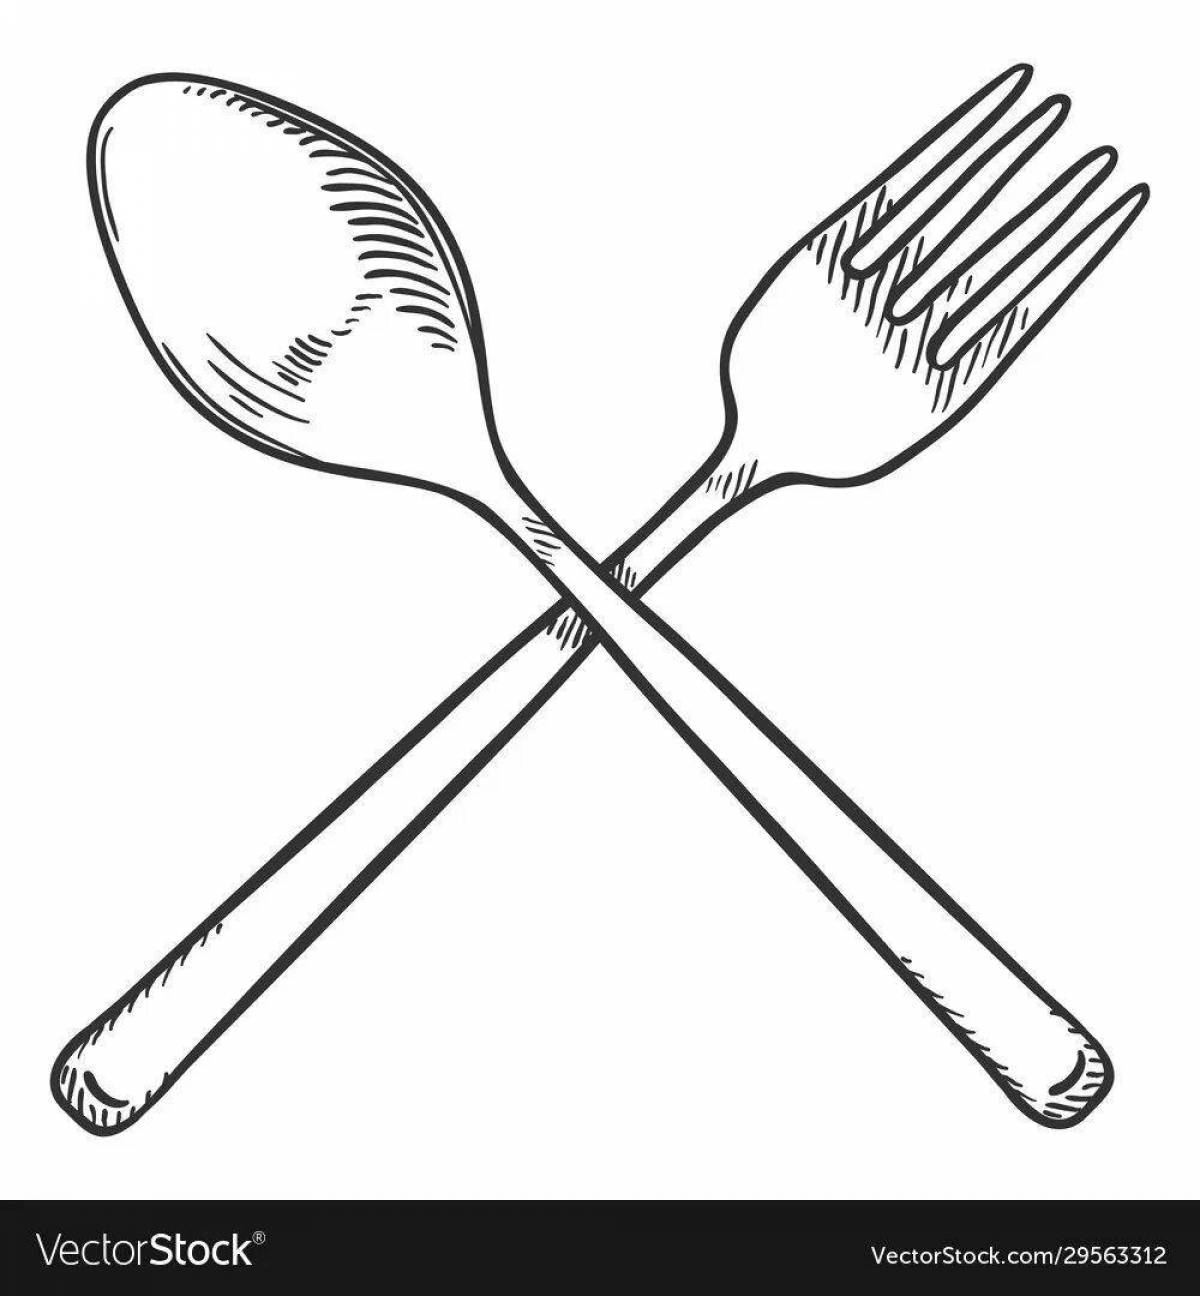 Great coloring fork for kids